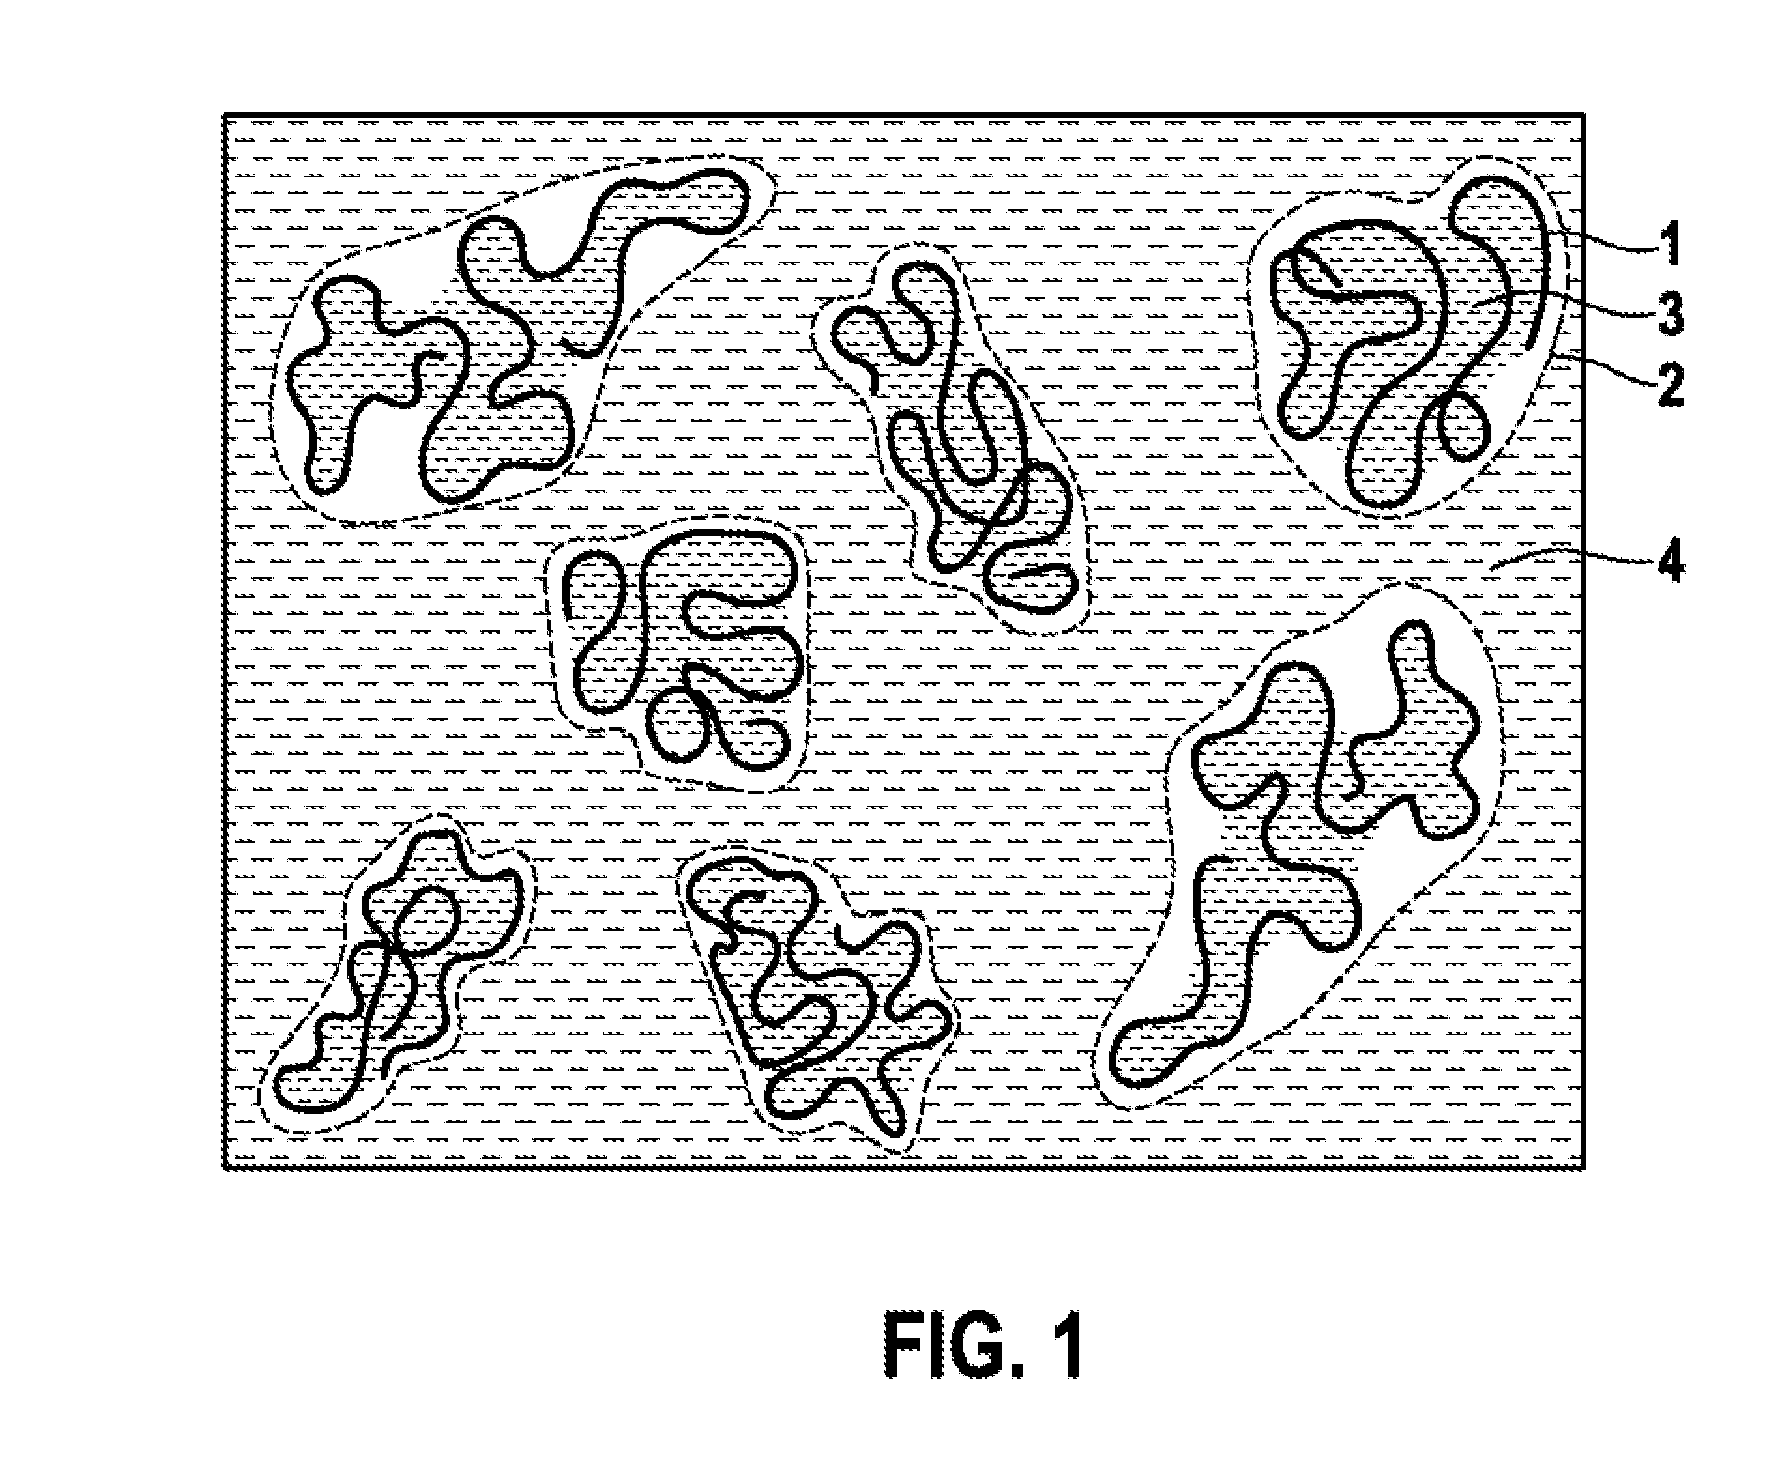 Composition for extinguishing and/or retarding fires containing fluorine and/or phosphorus